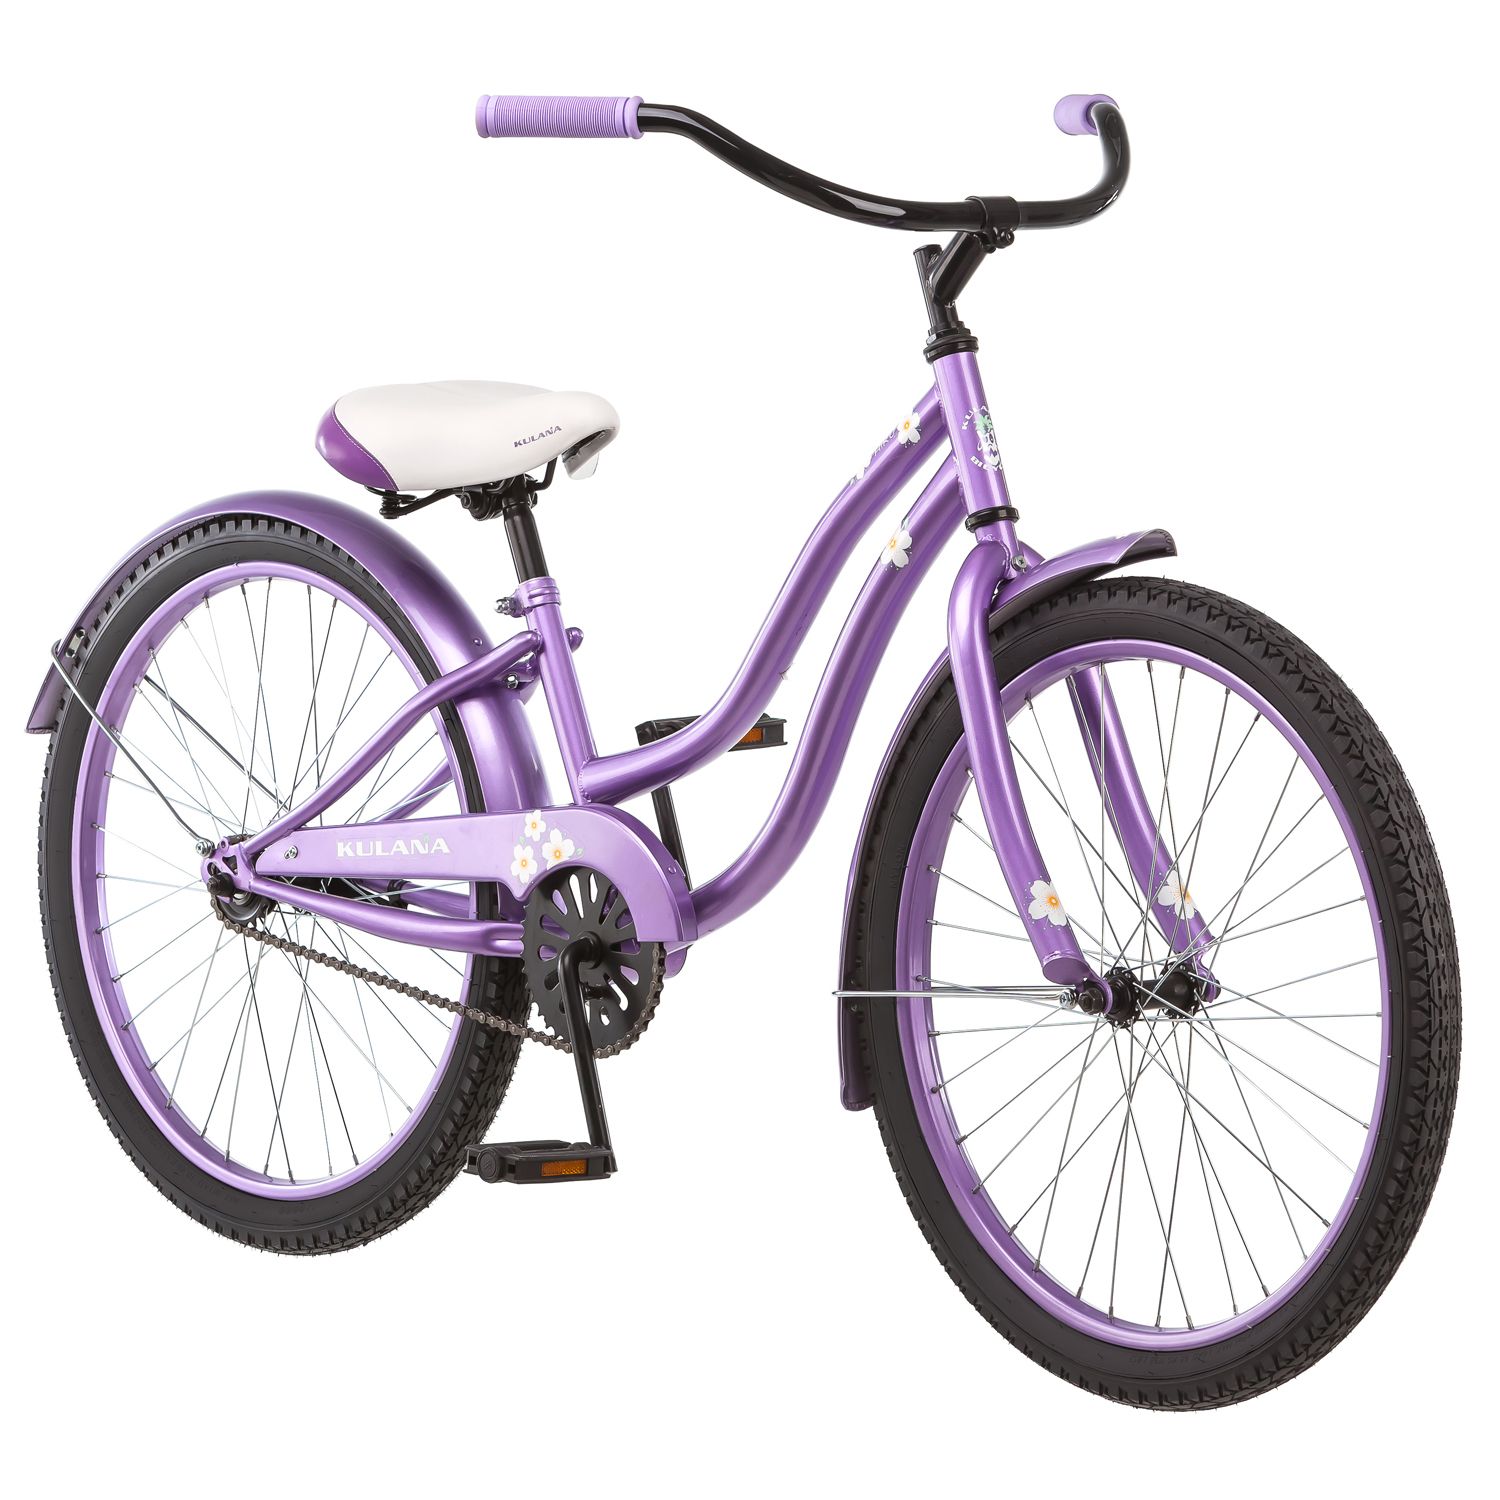 24 in girls bicycle